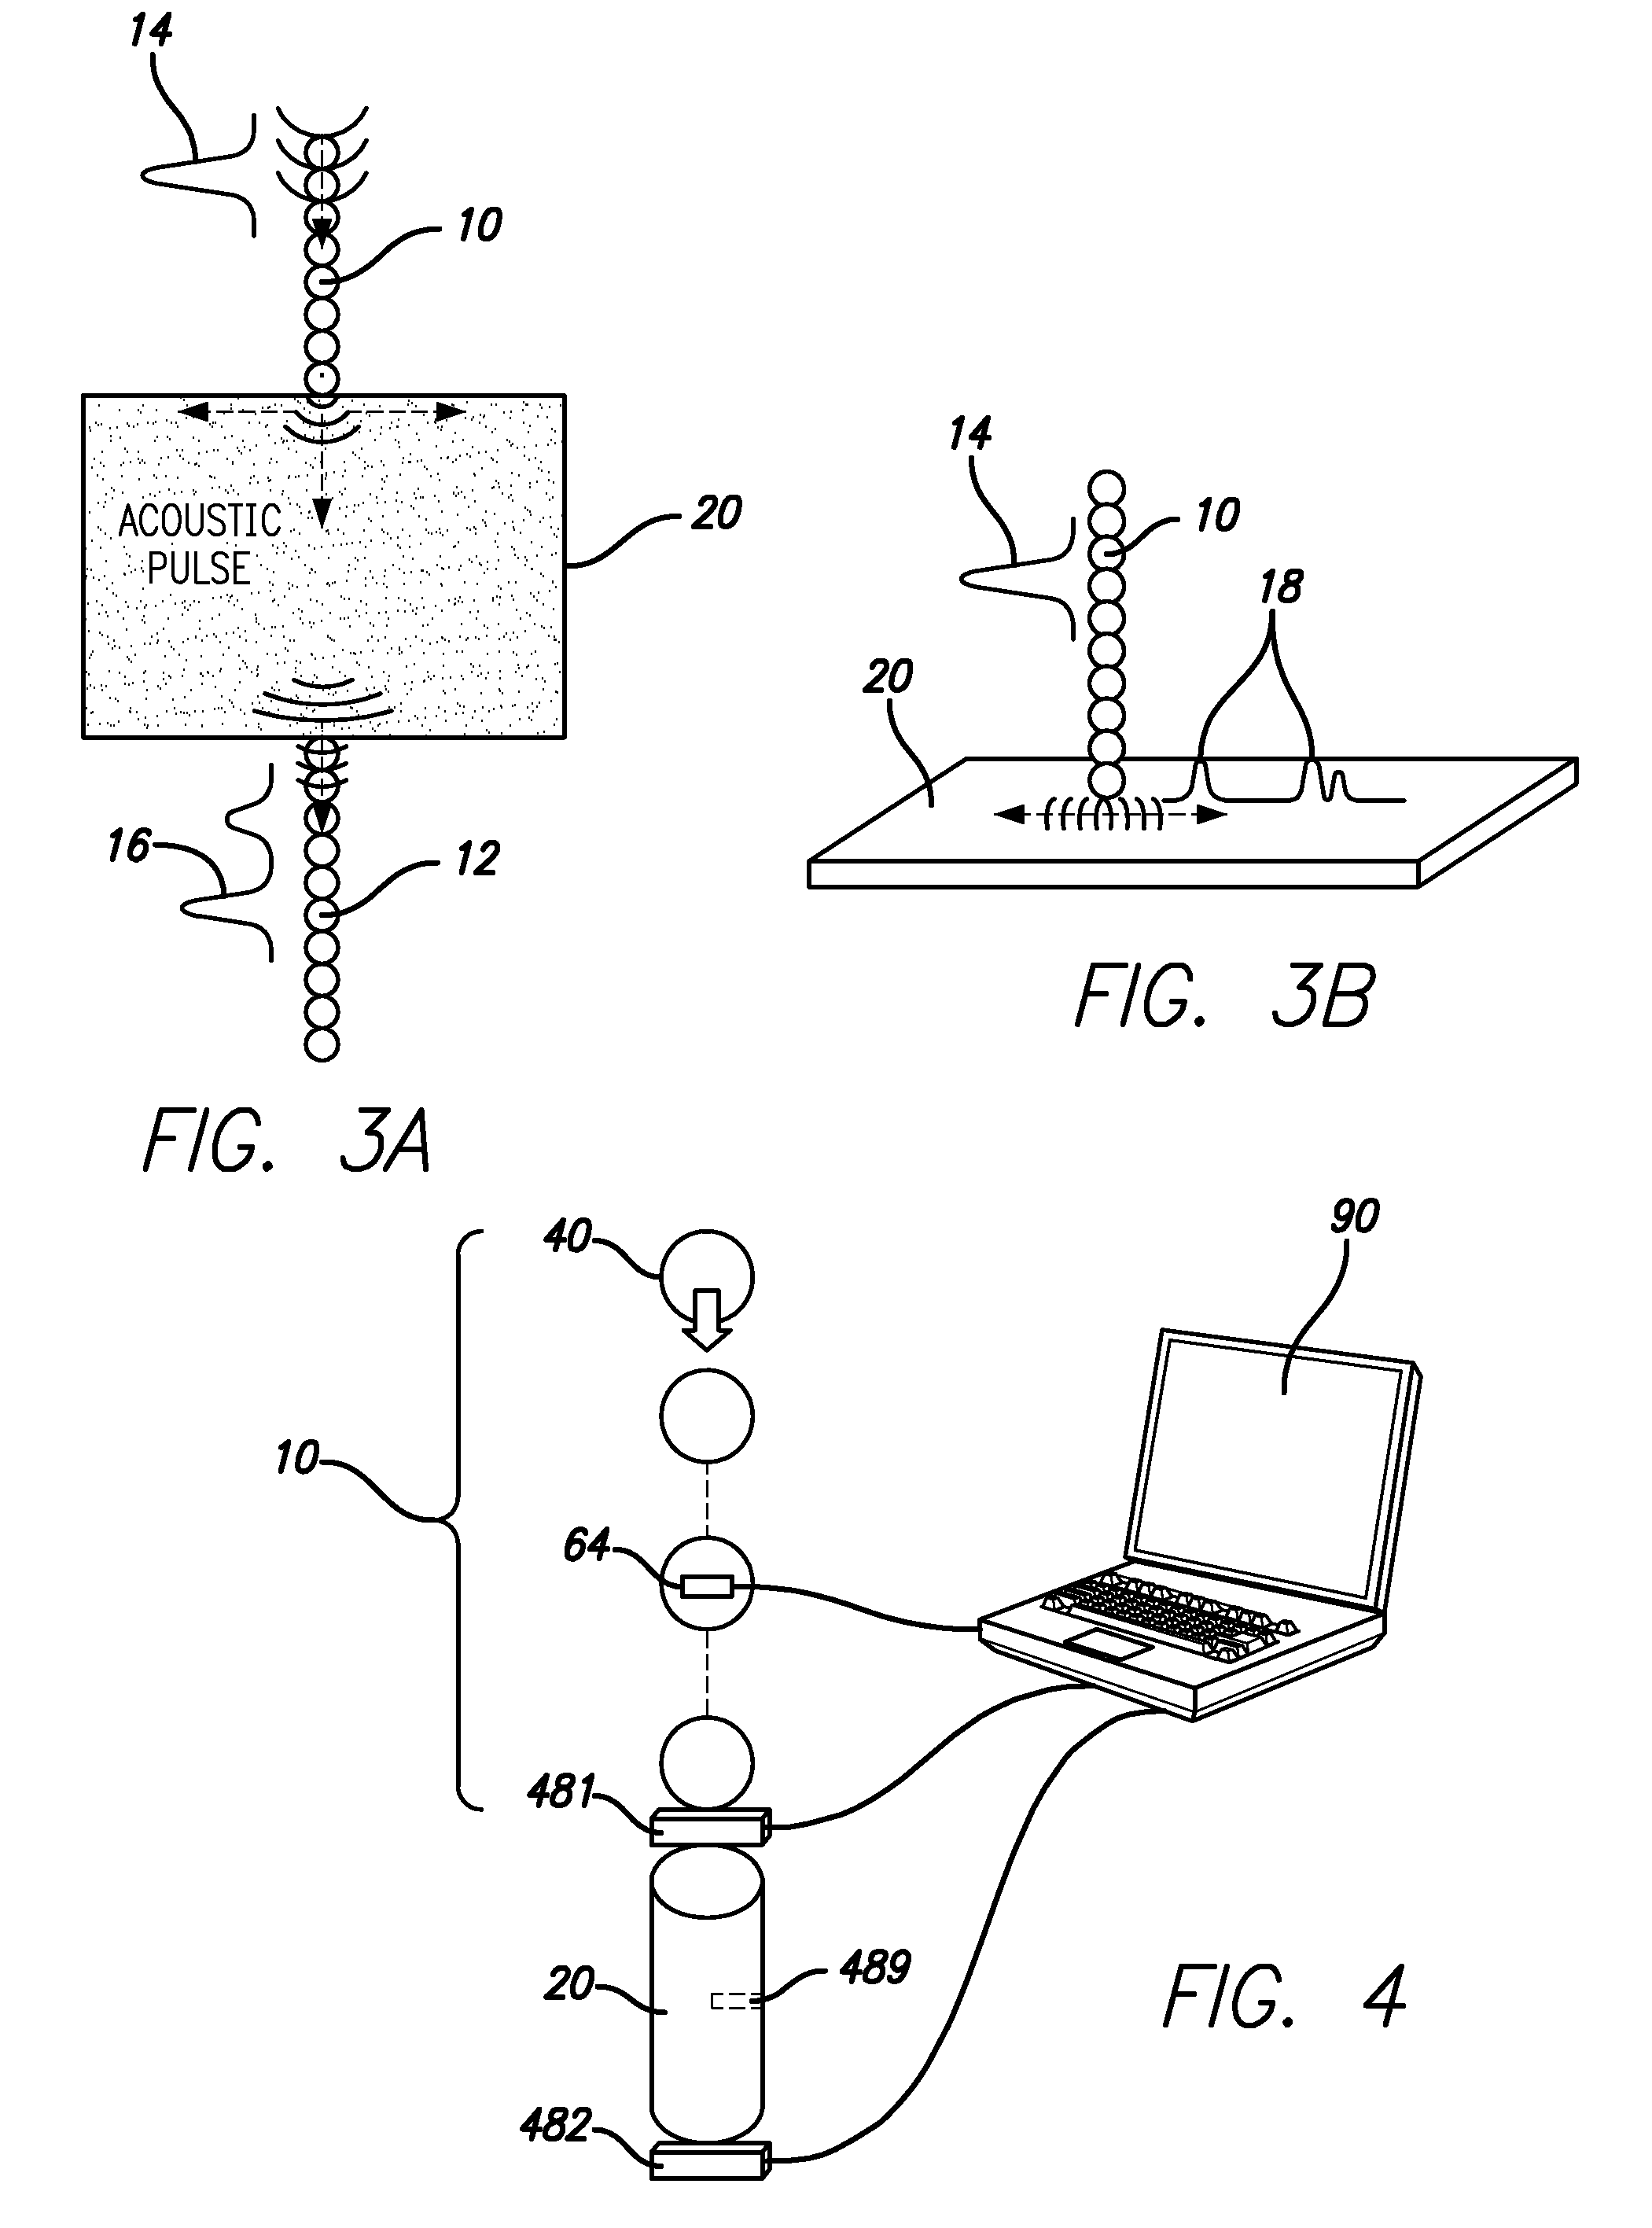 Method and apparatus for nondestructive evaluation and monitoring of materials and structures